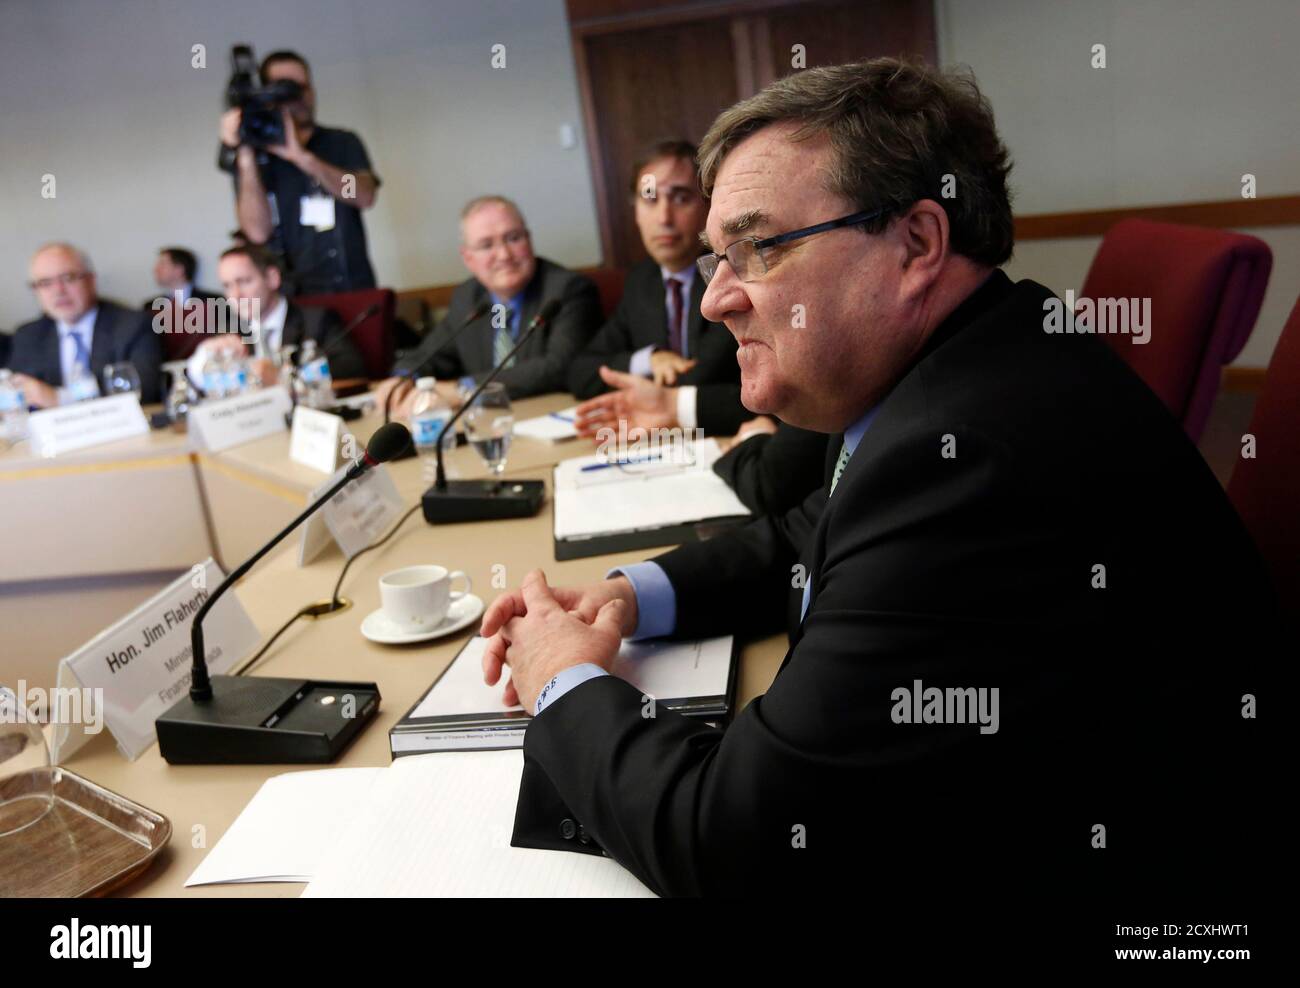 Canada's Finance Minister Jim Flaherty (R) meets with private sector economists in Ottawa March 8, 2013.     REUTERS/Chris Wattie     (CANADA - Tags: POLITICS BUSINESS) Stock Photo